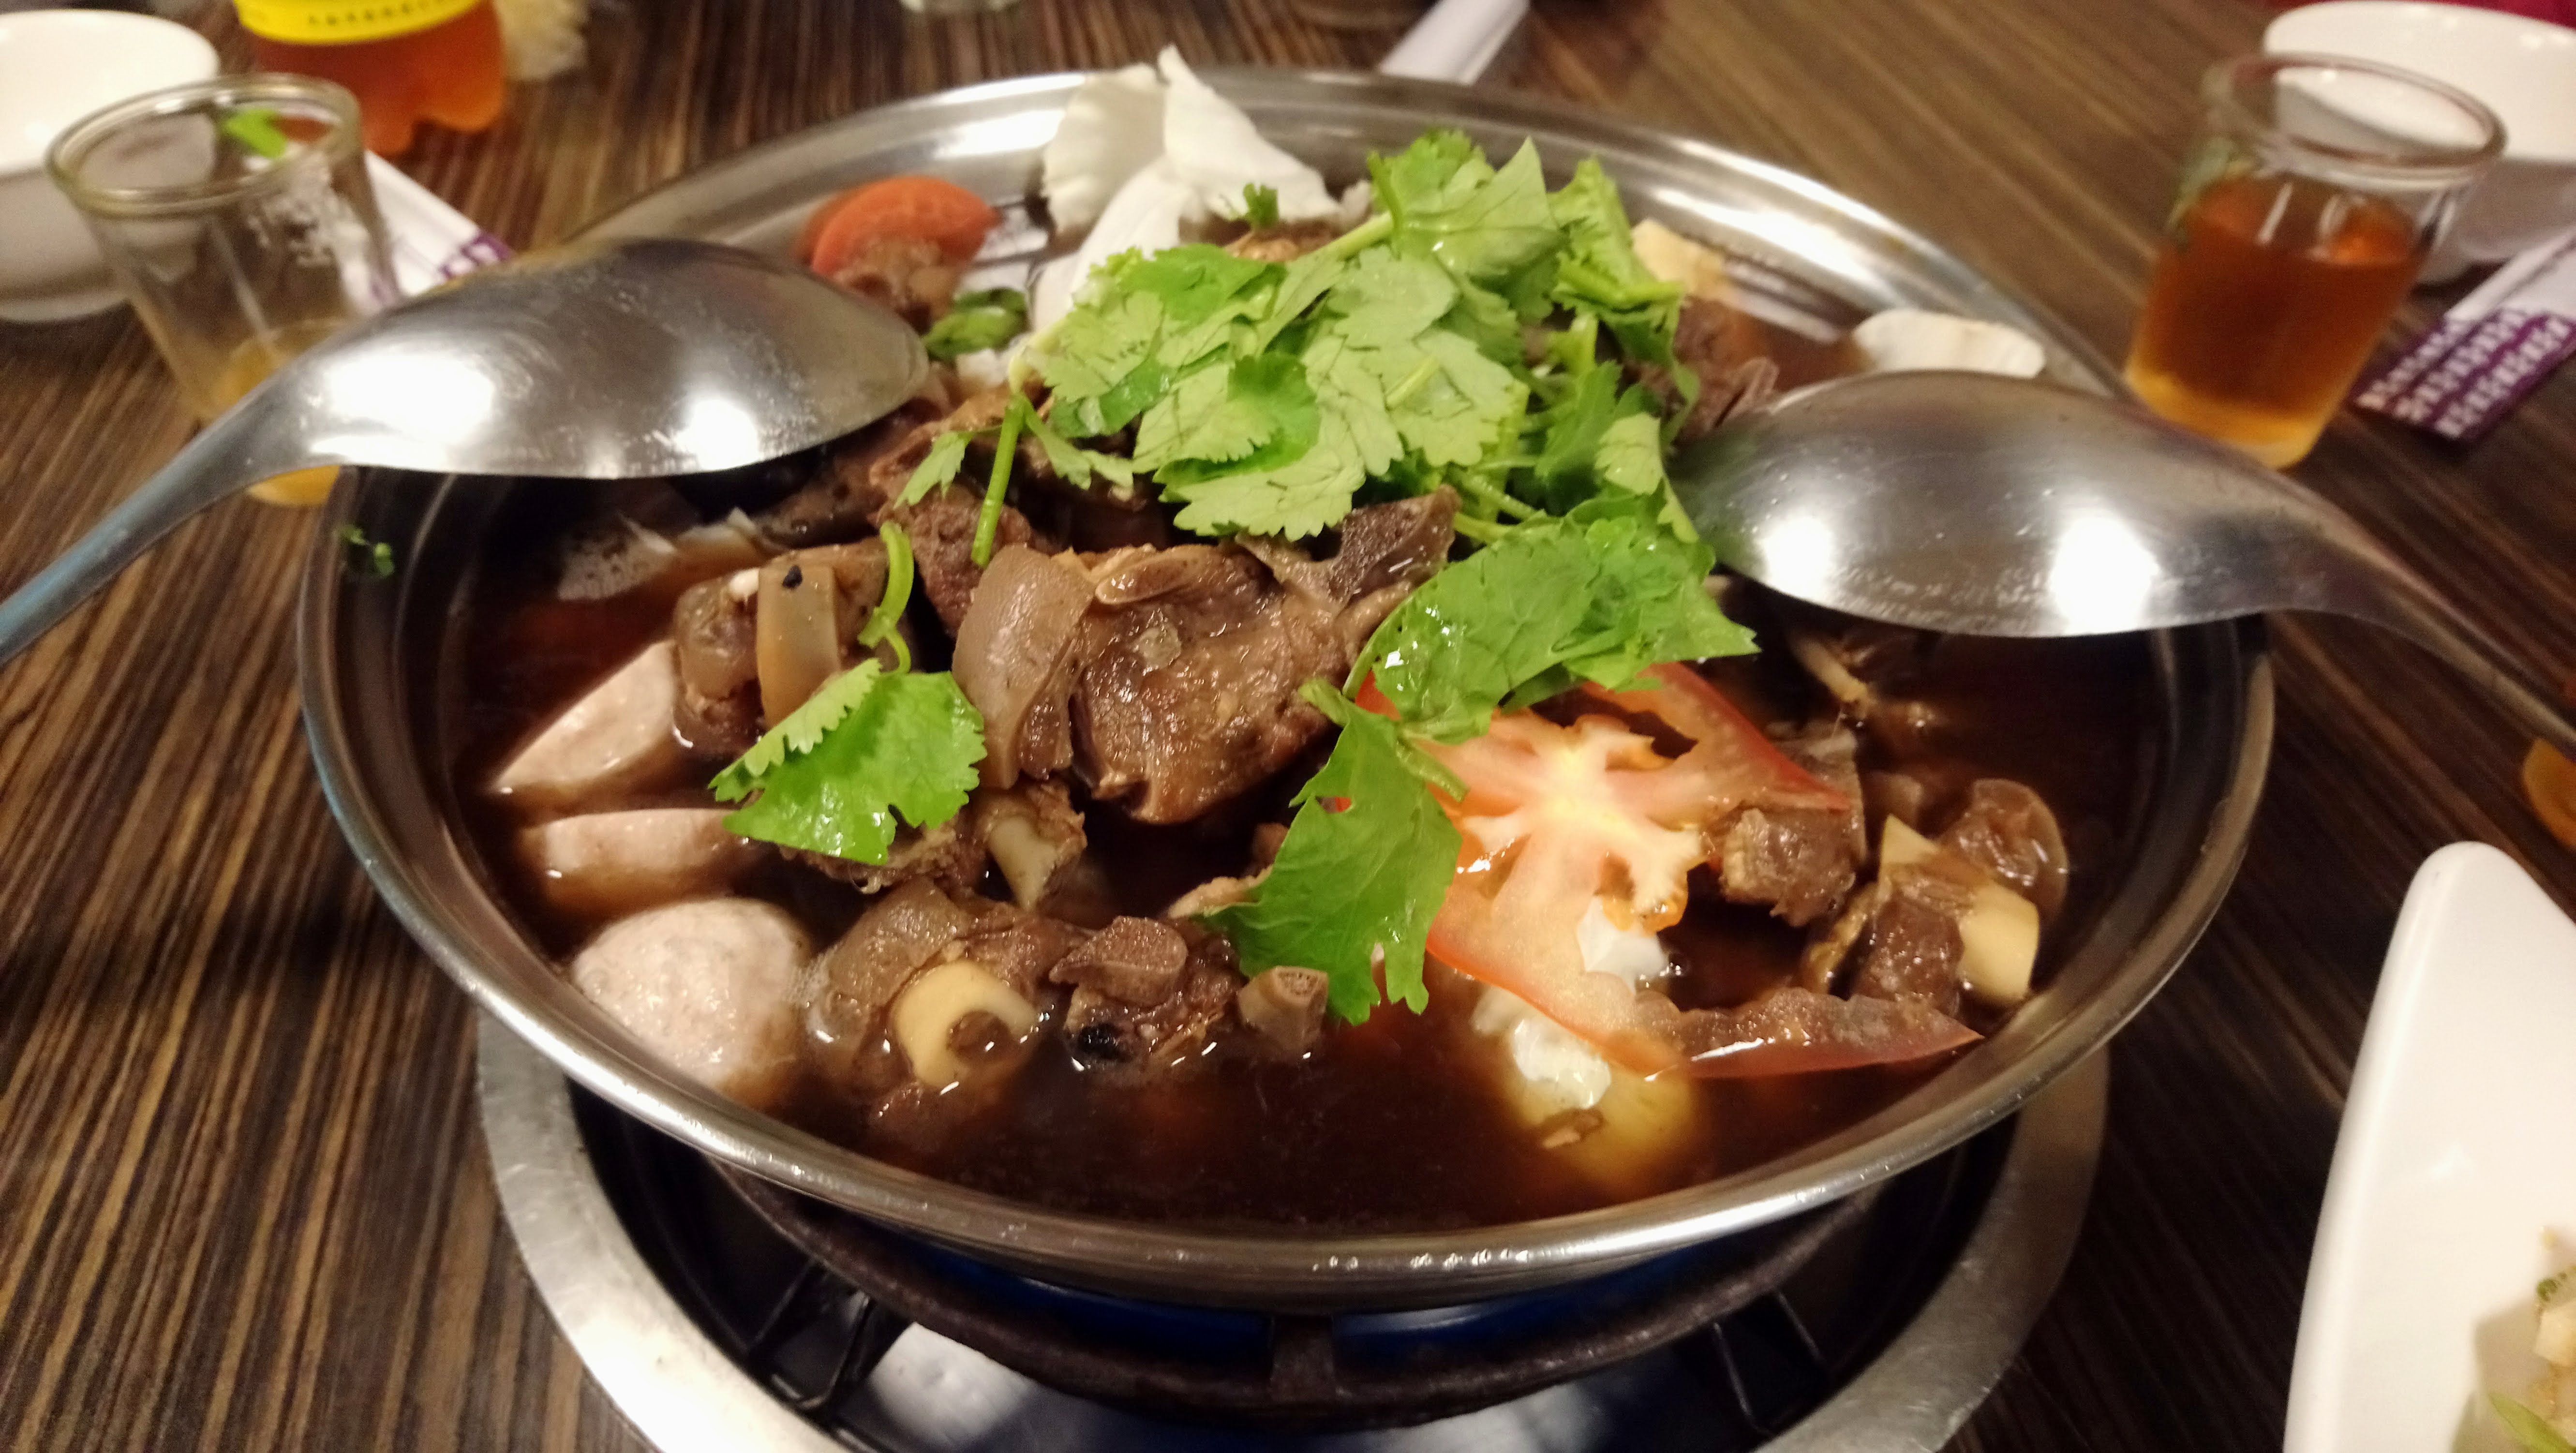 A crypto night with mutton hot pot - meeting Steemians from Hong Kong